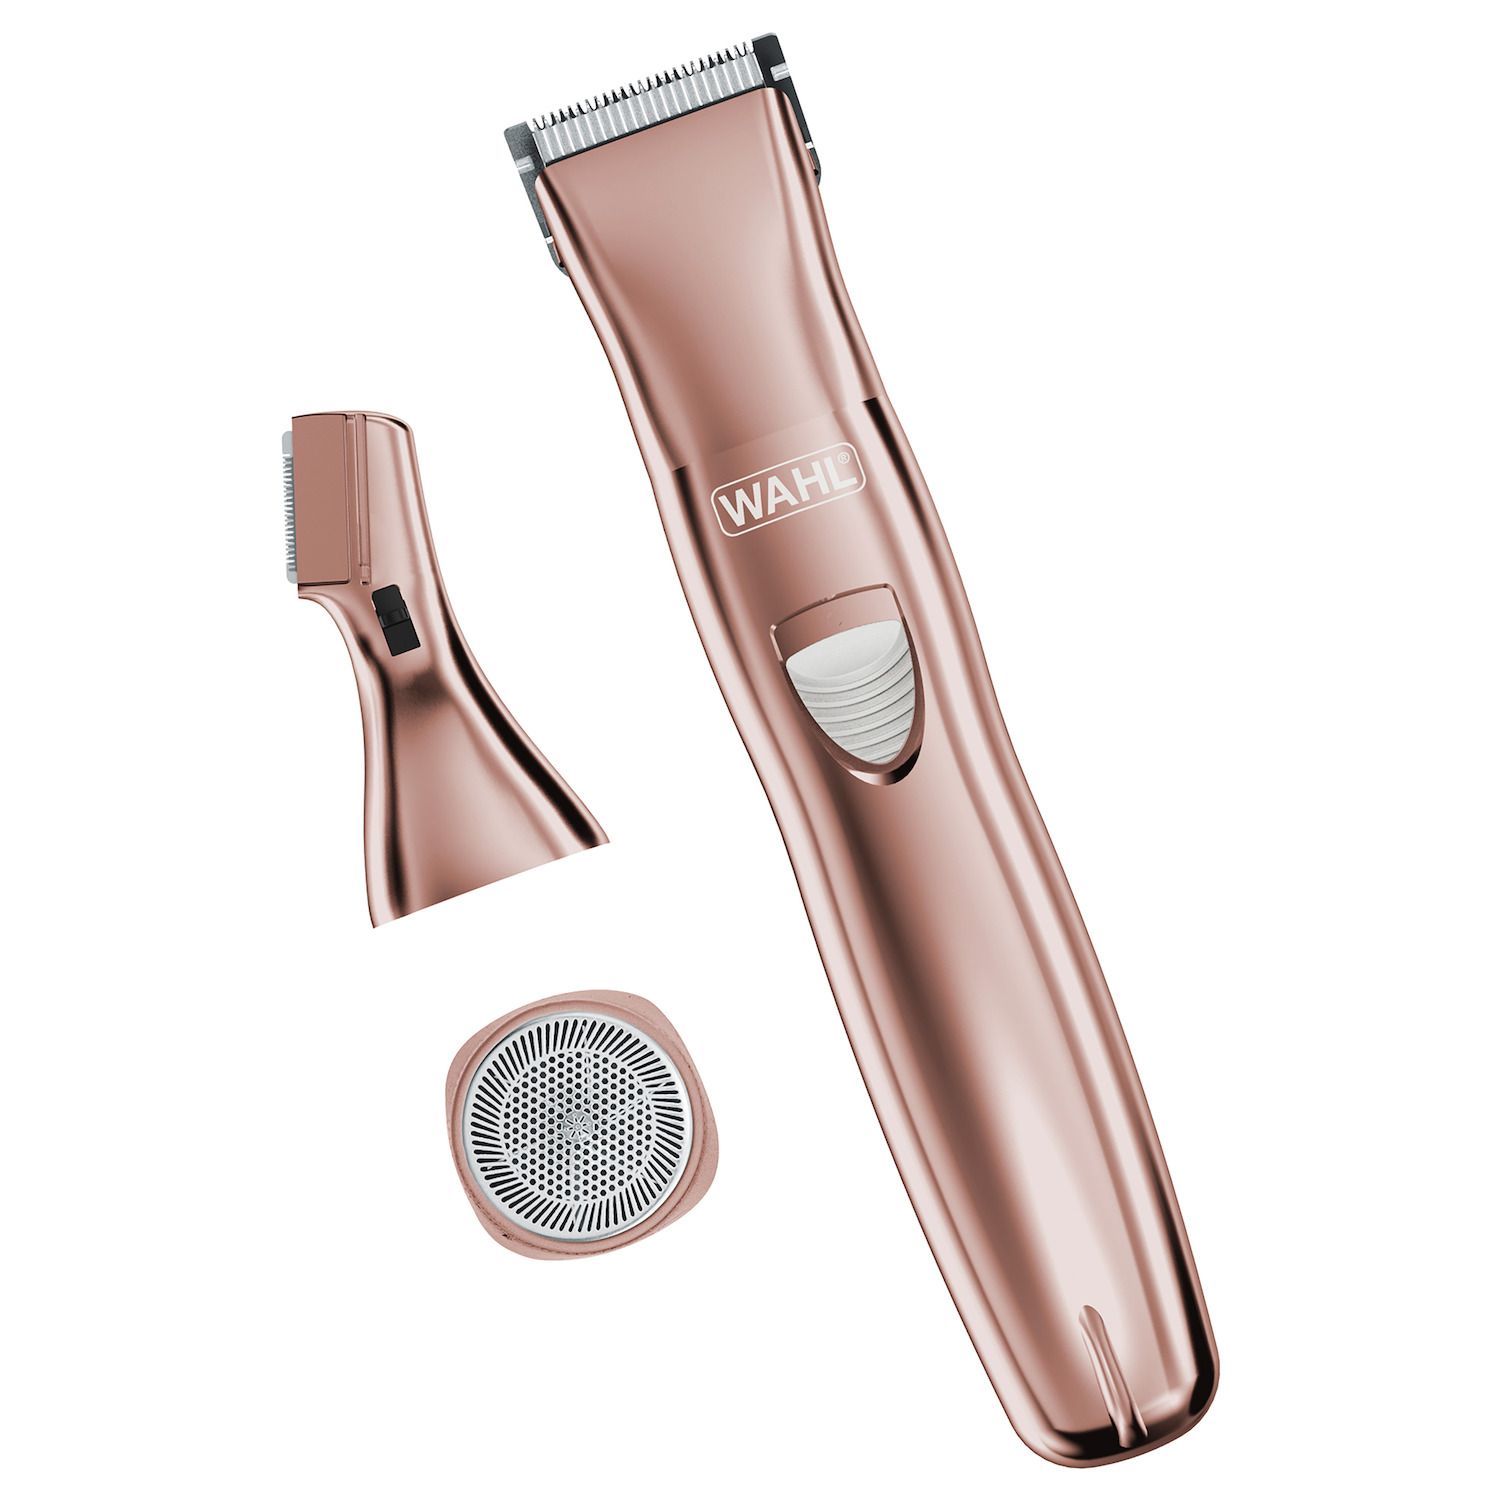 wahl rechargeable personal trimmer